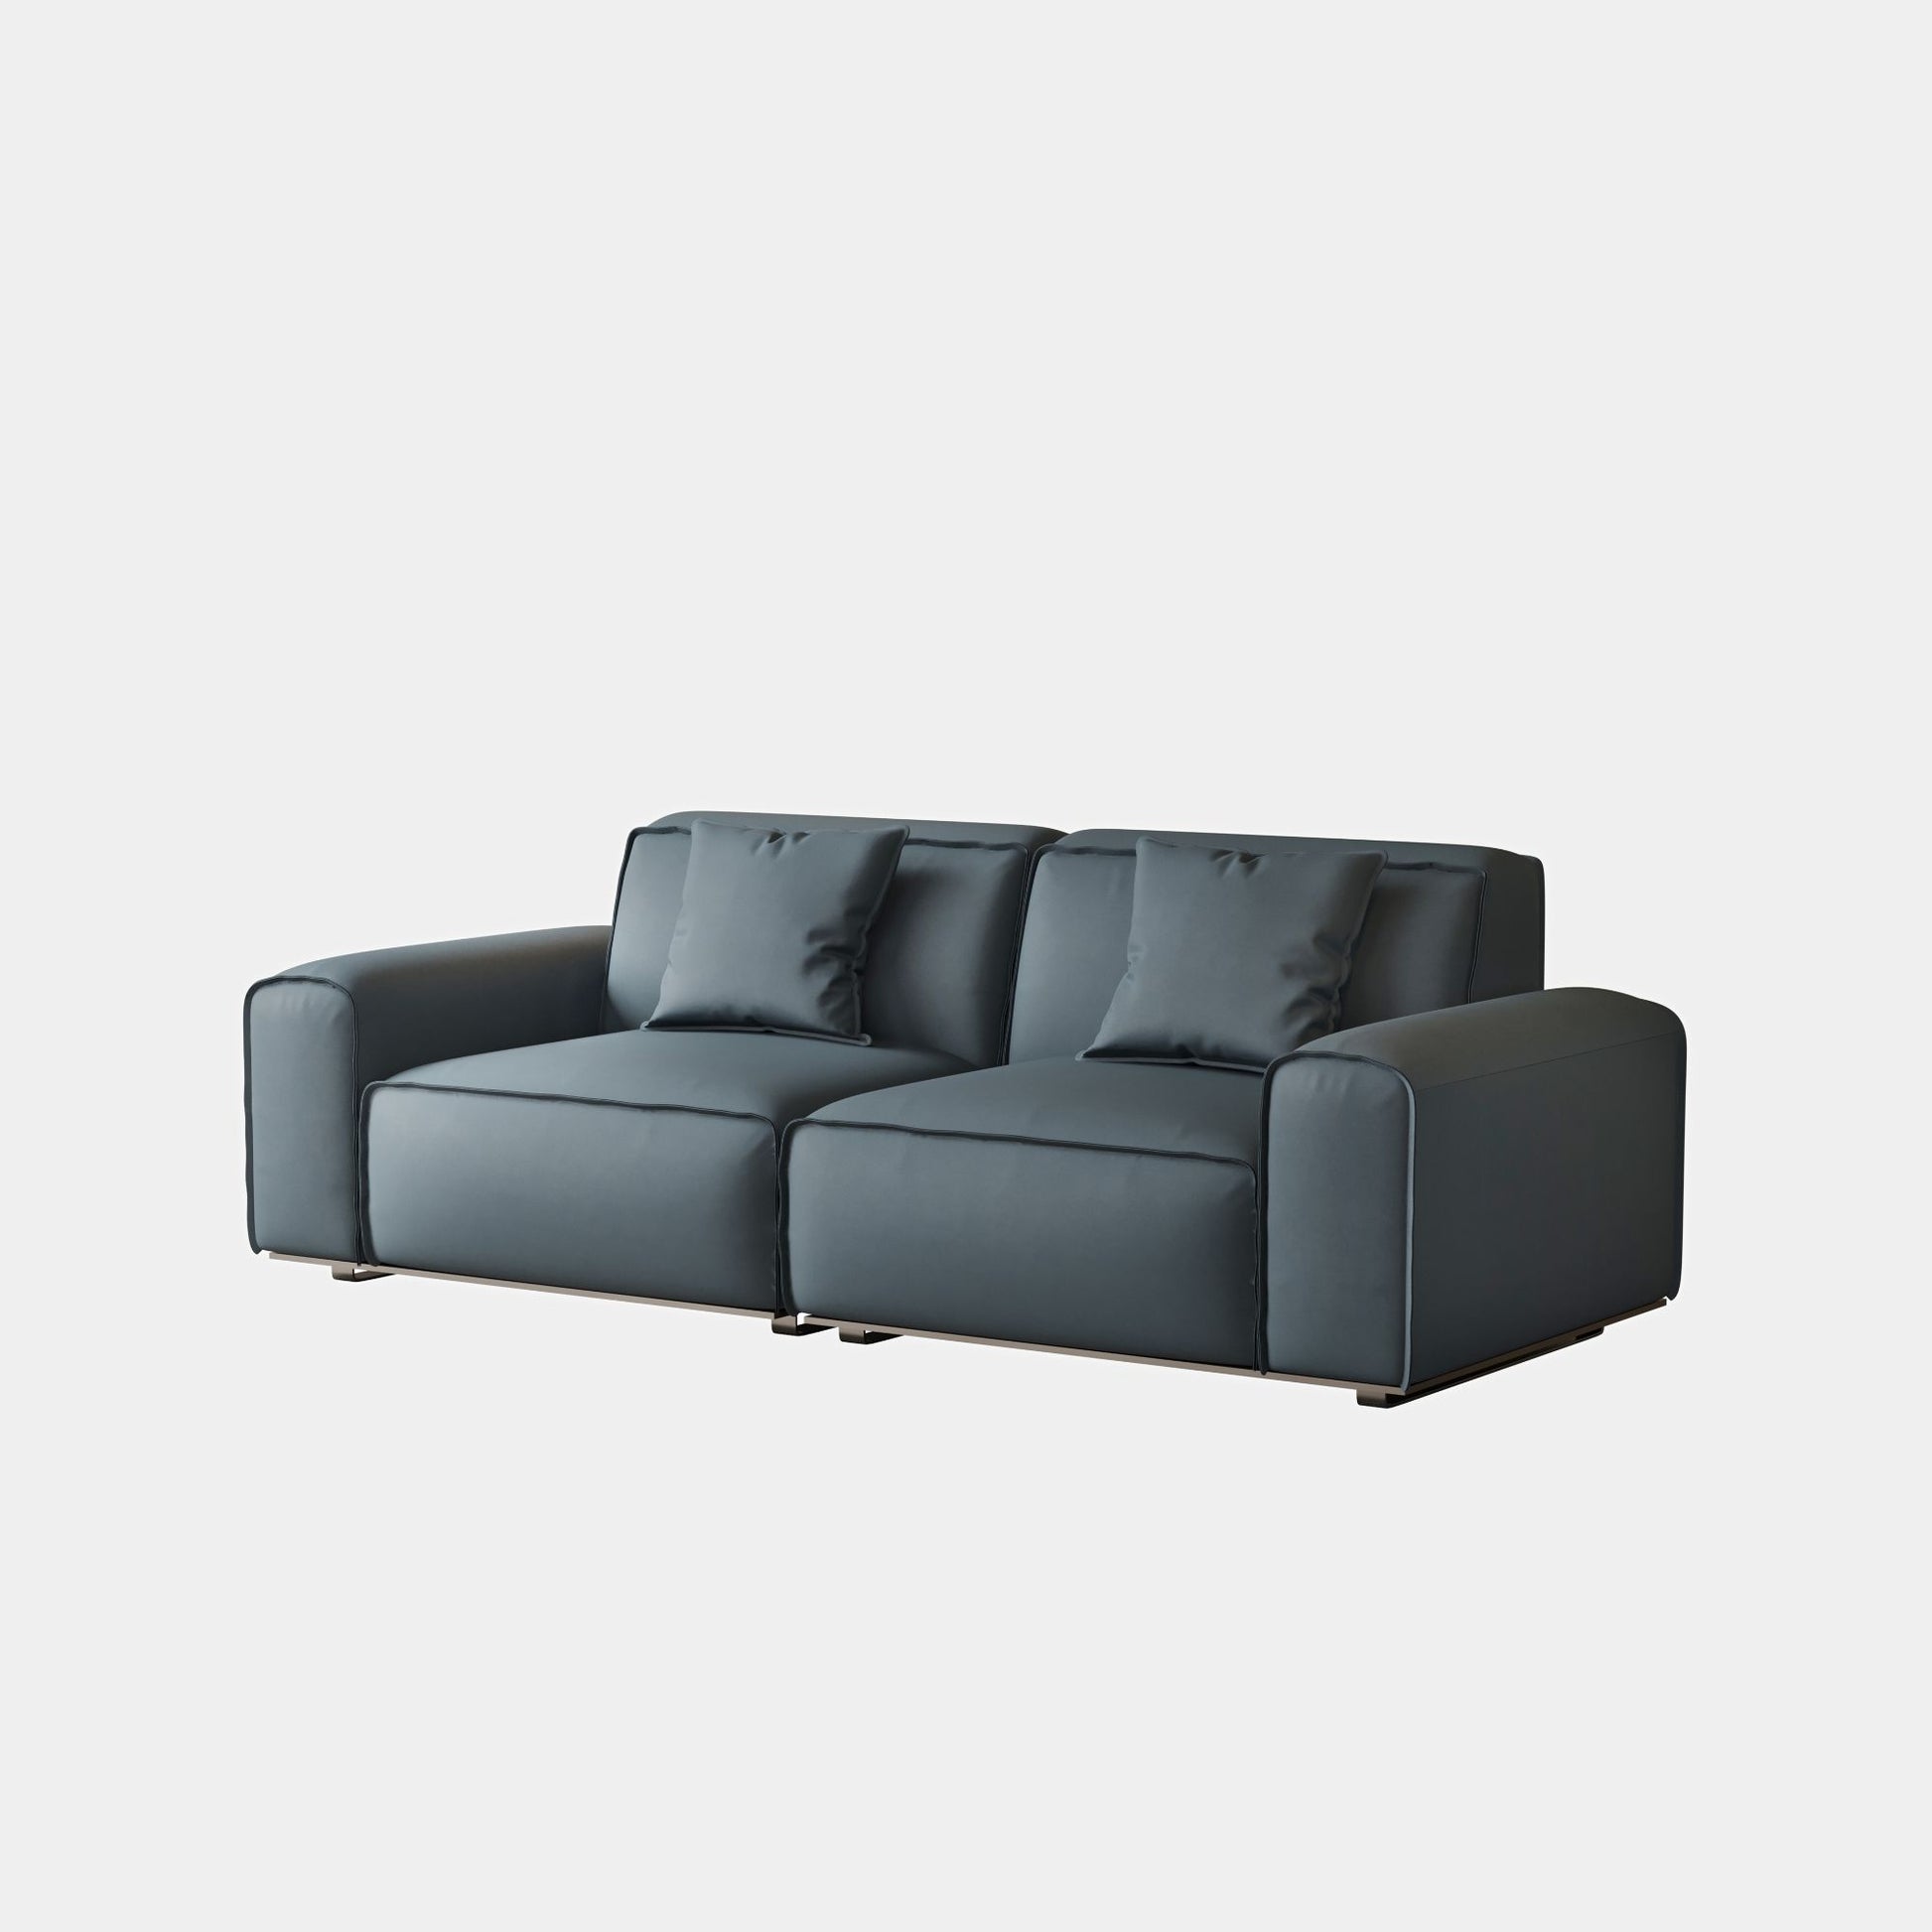 Colby blue top grain half leather 2 seat sofa